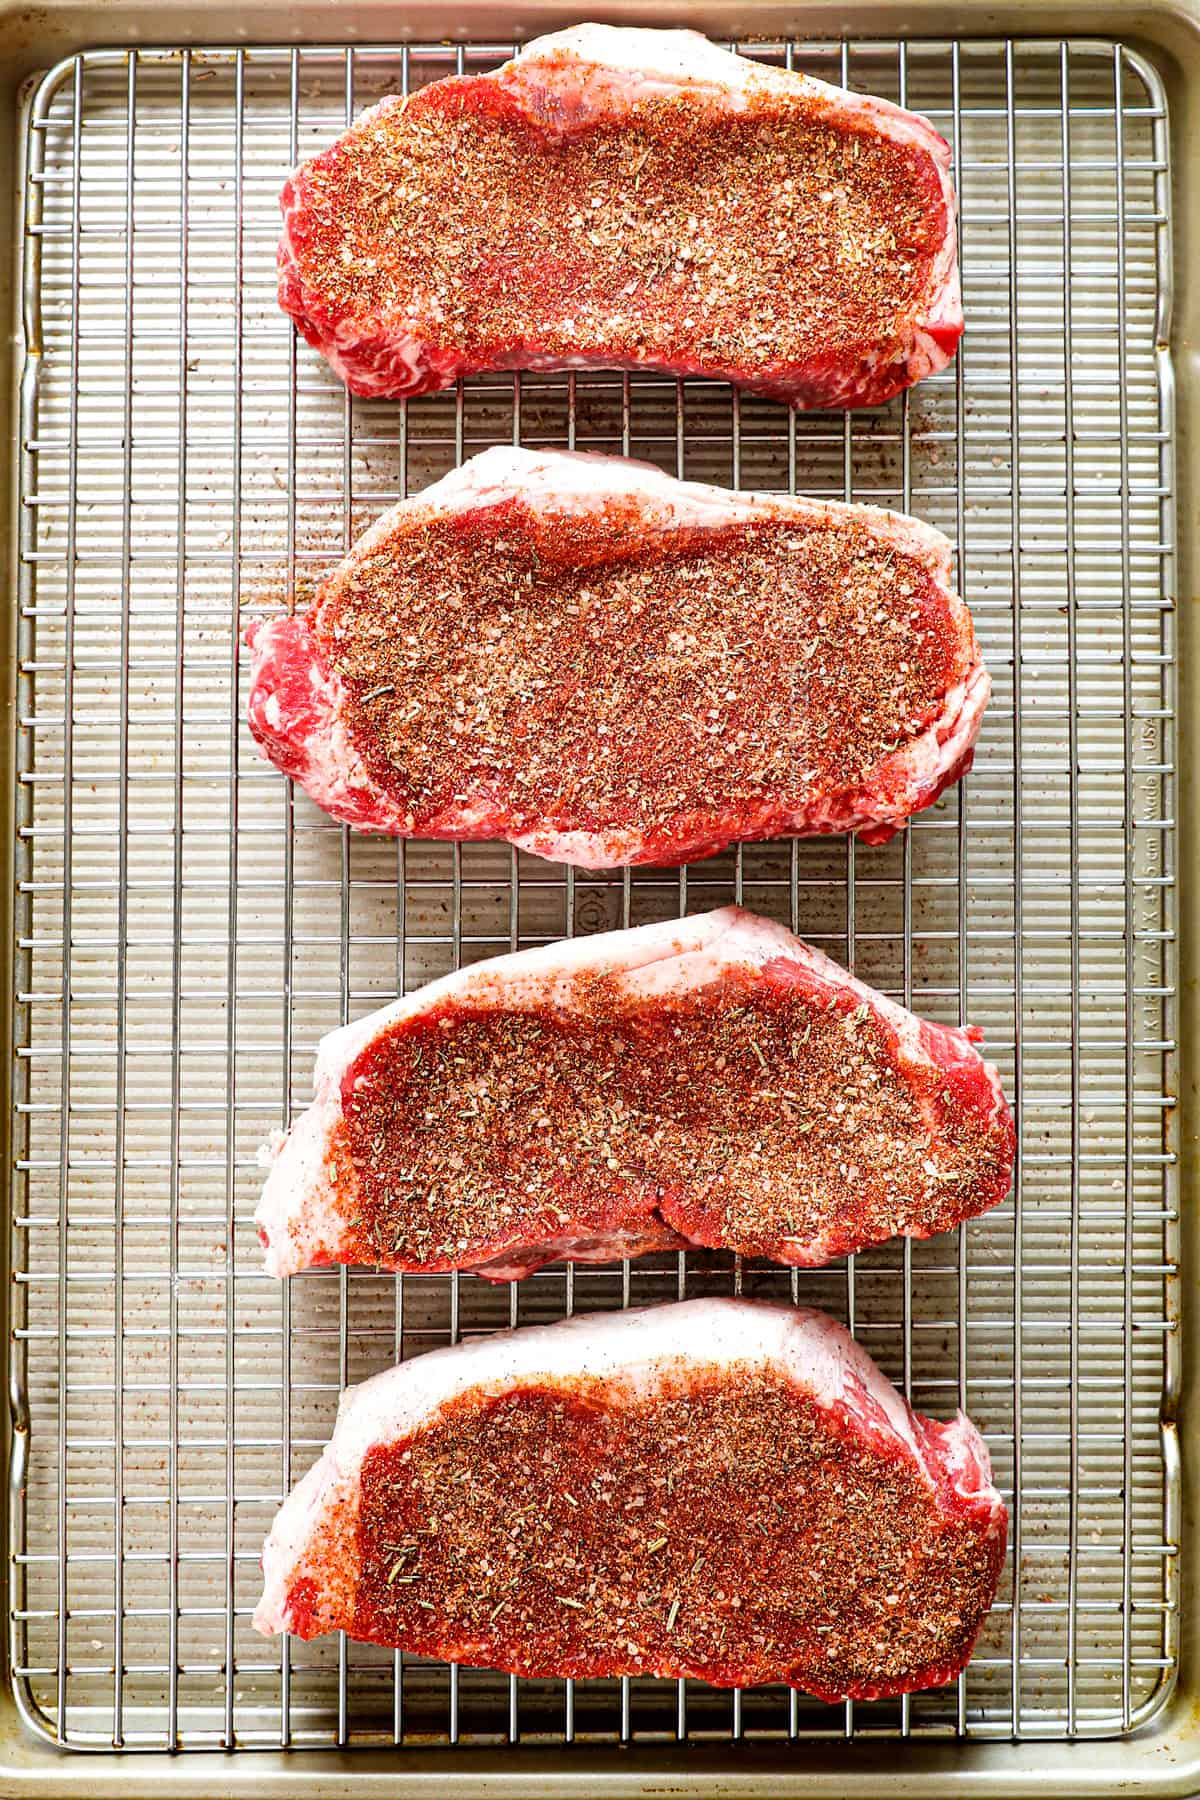 top view showing how to season steaks with steak rub on a wire rack 